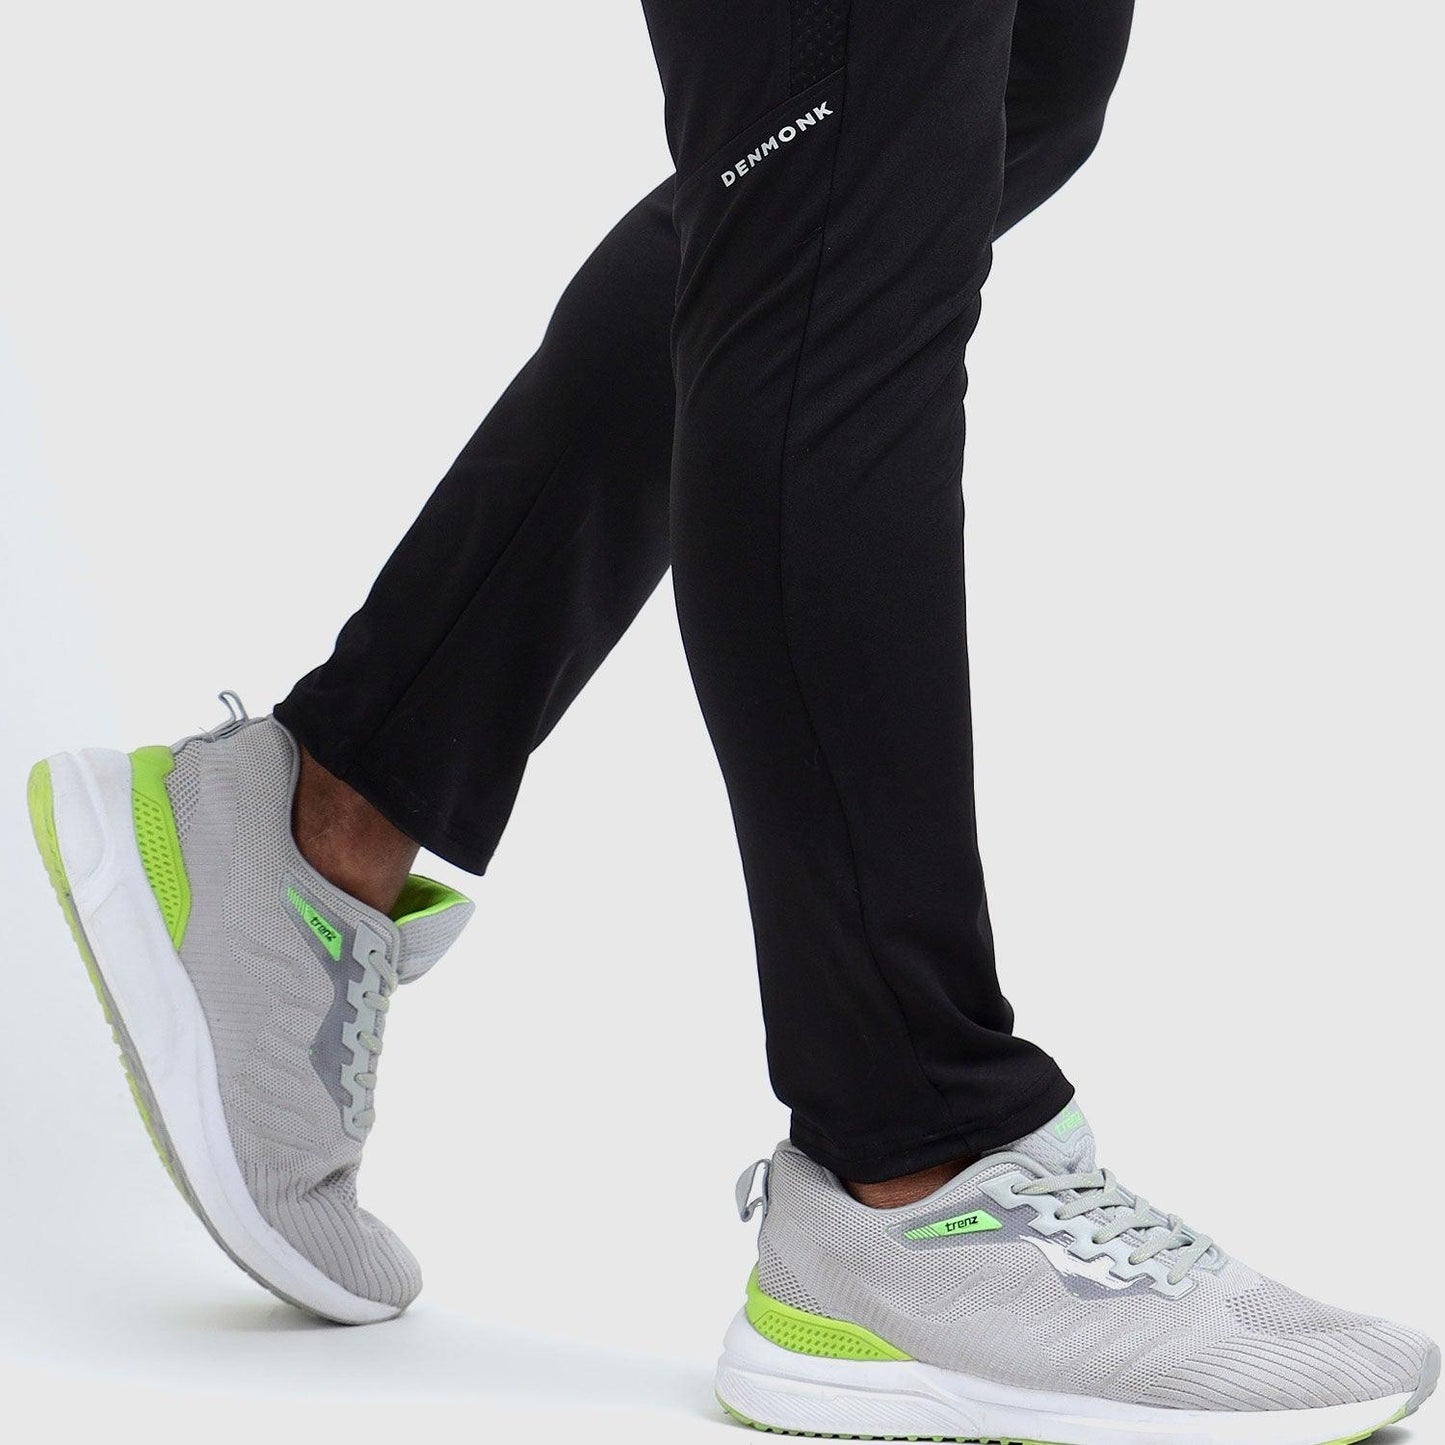 Denmonk: Elevate your look with these Urbanstribe sharp black joggers for mens.